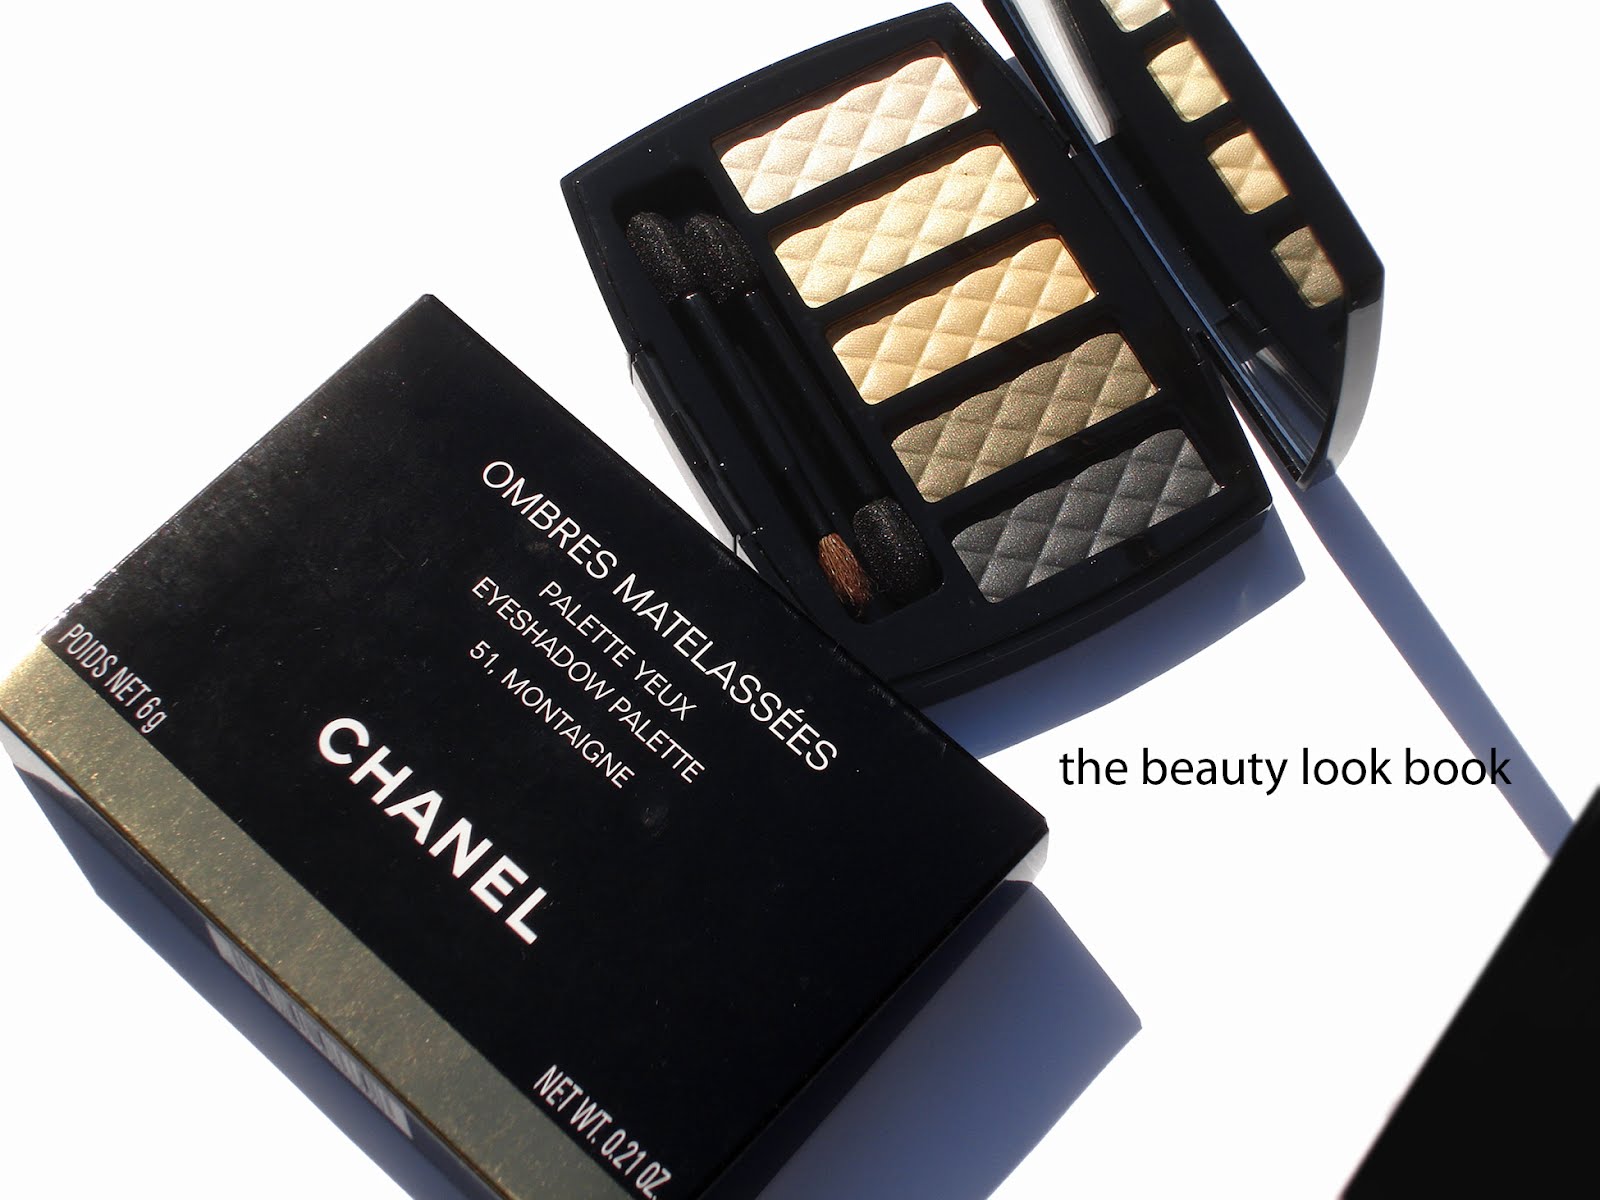 Chanel Ombres Matelassees Eyeshadow Palette - Pearl River